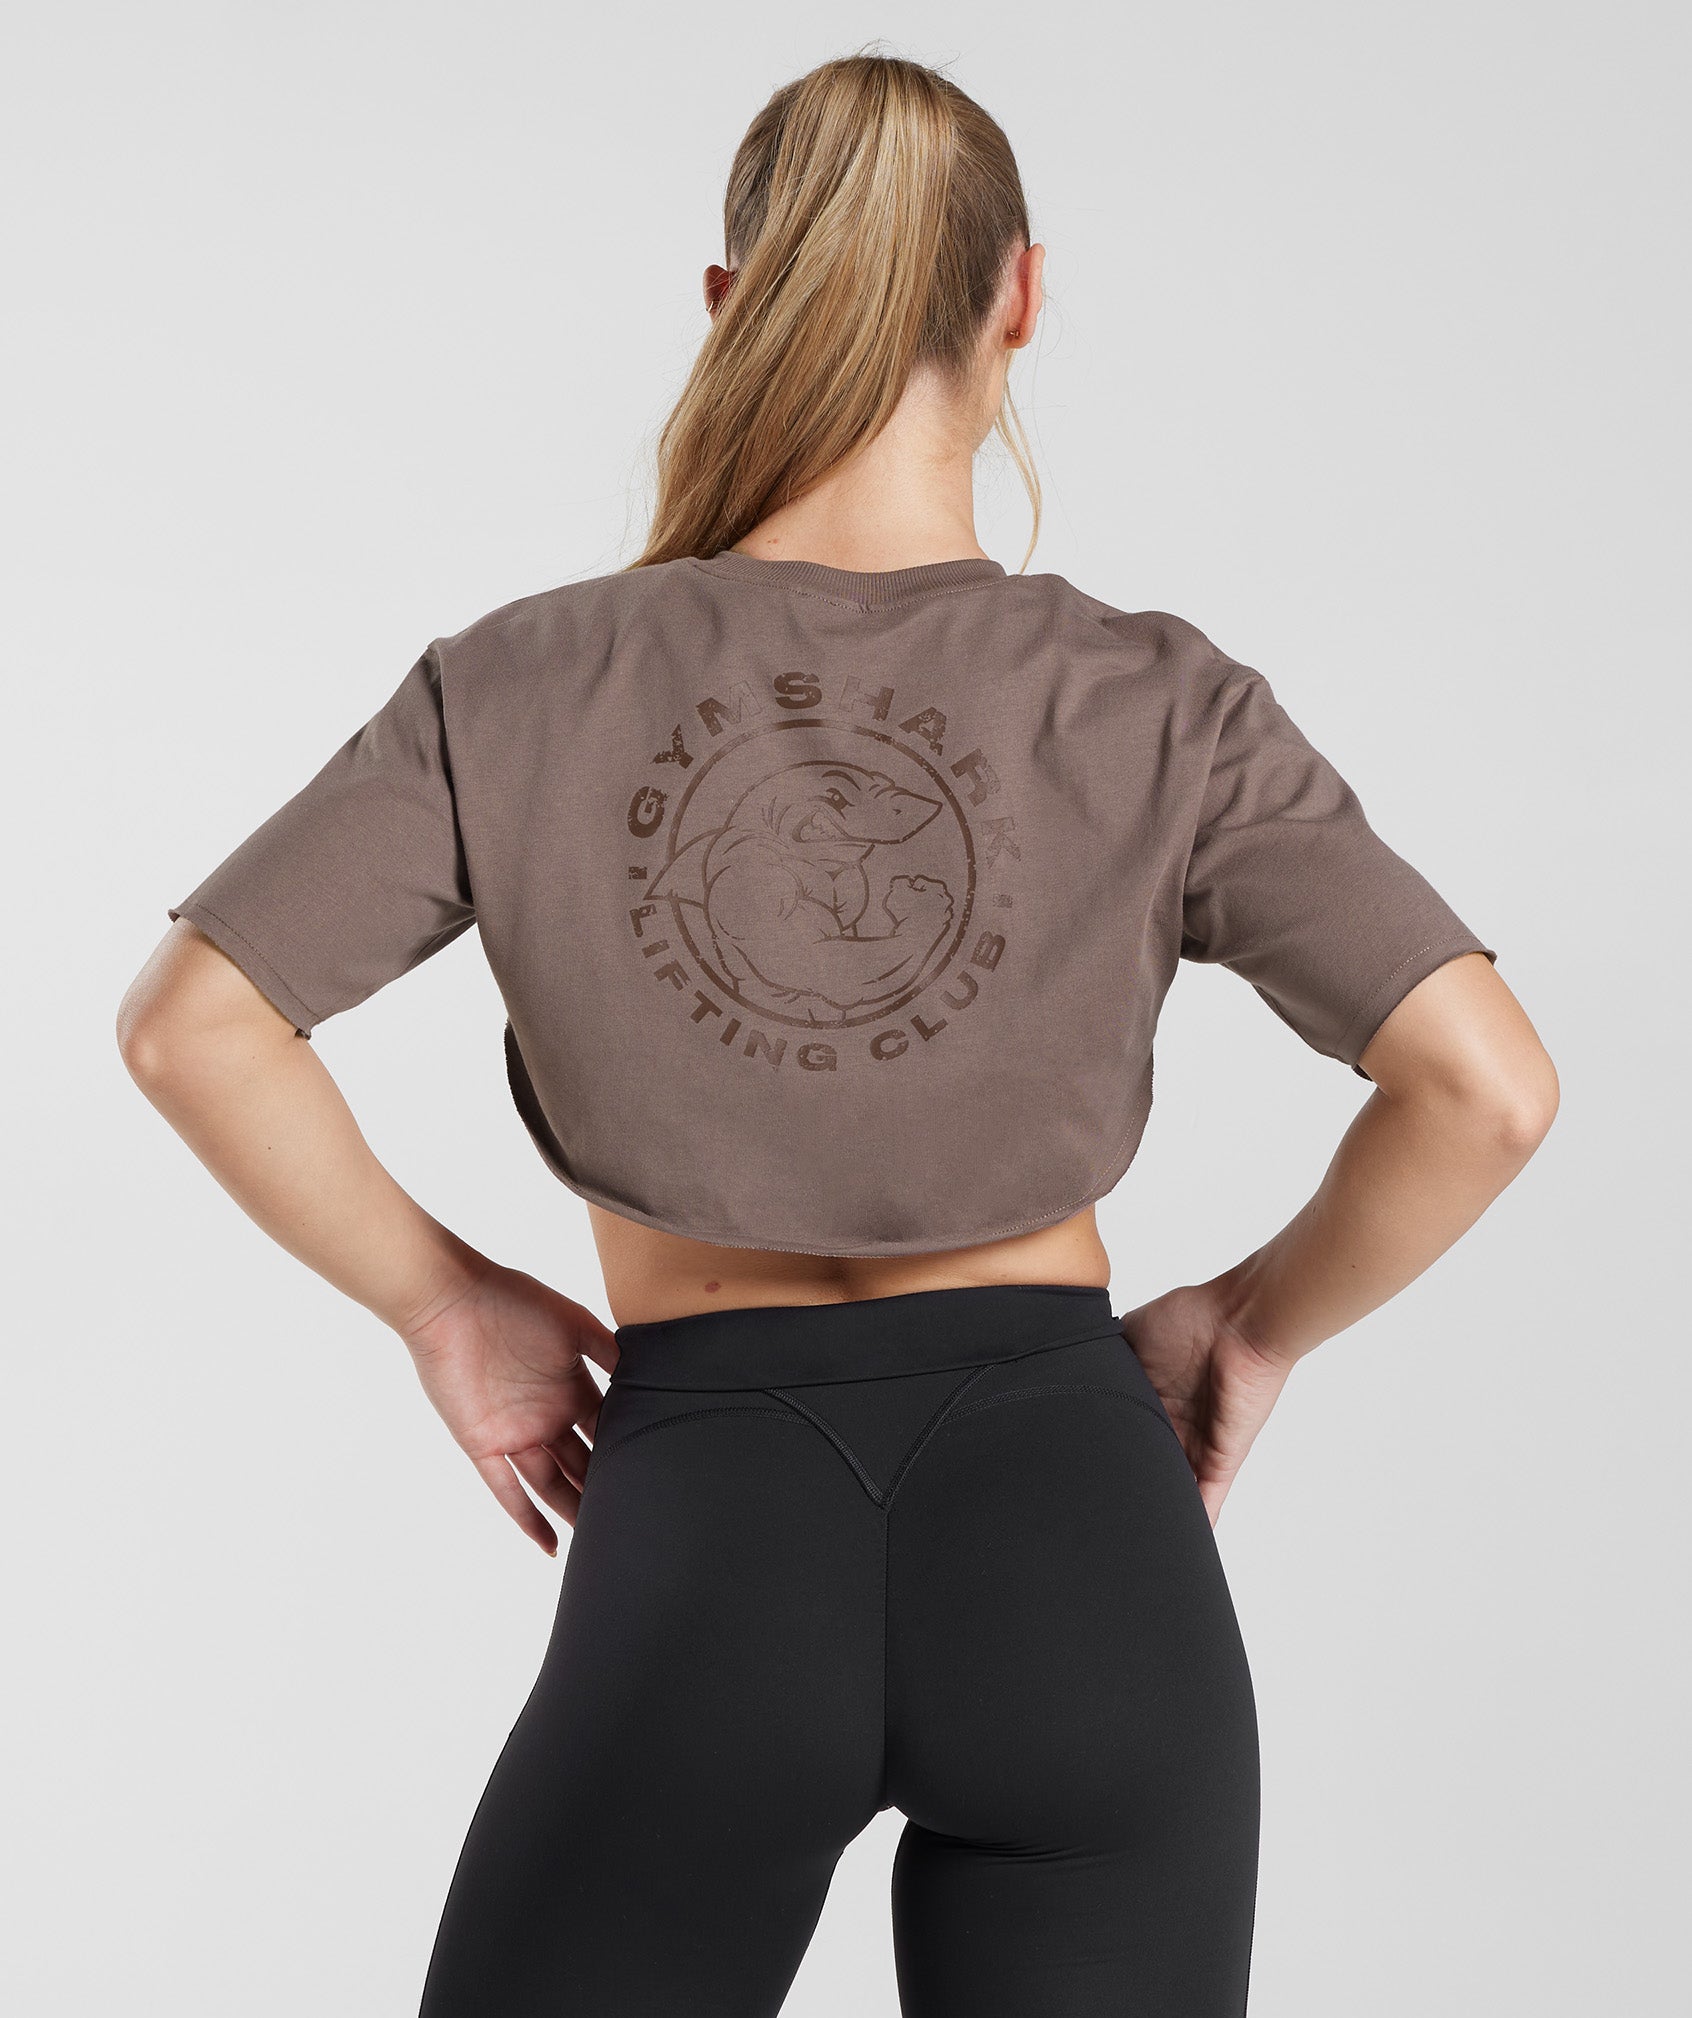 Legacy Shrug Top in Truffle Brown - view 2